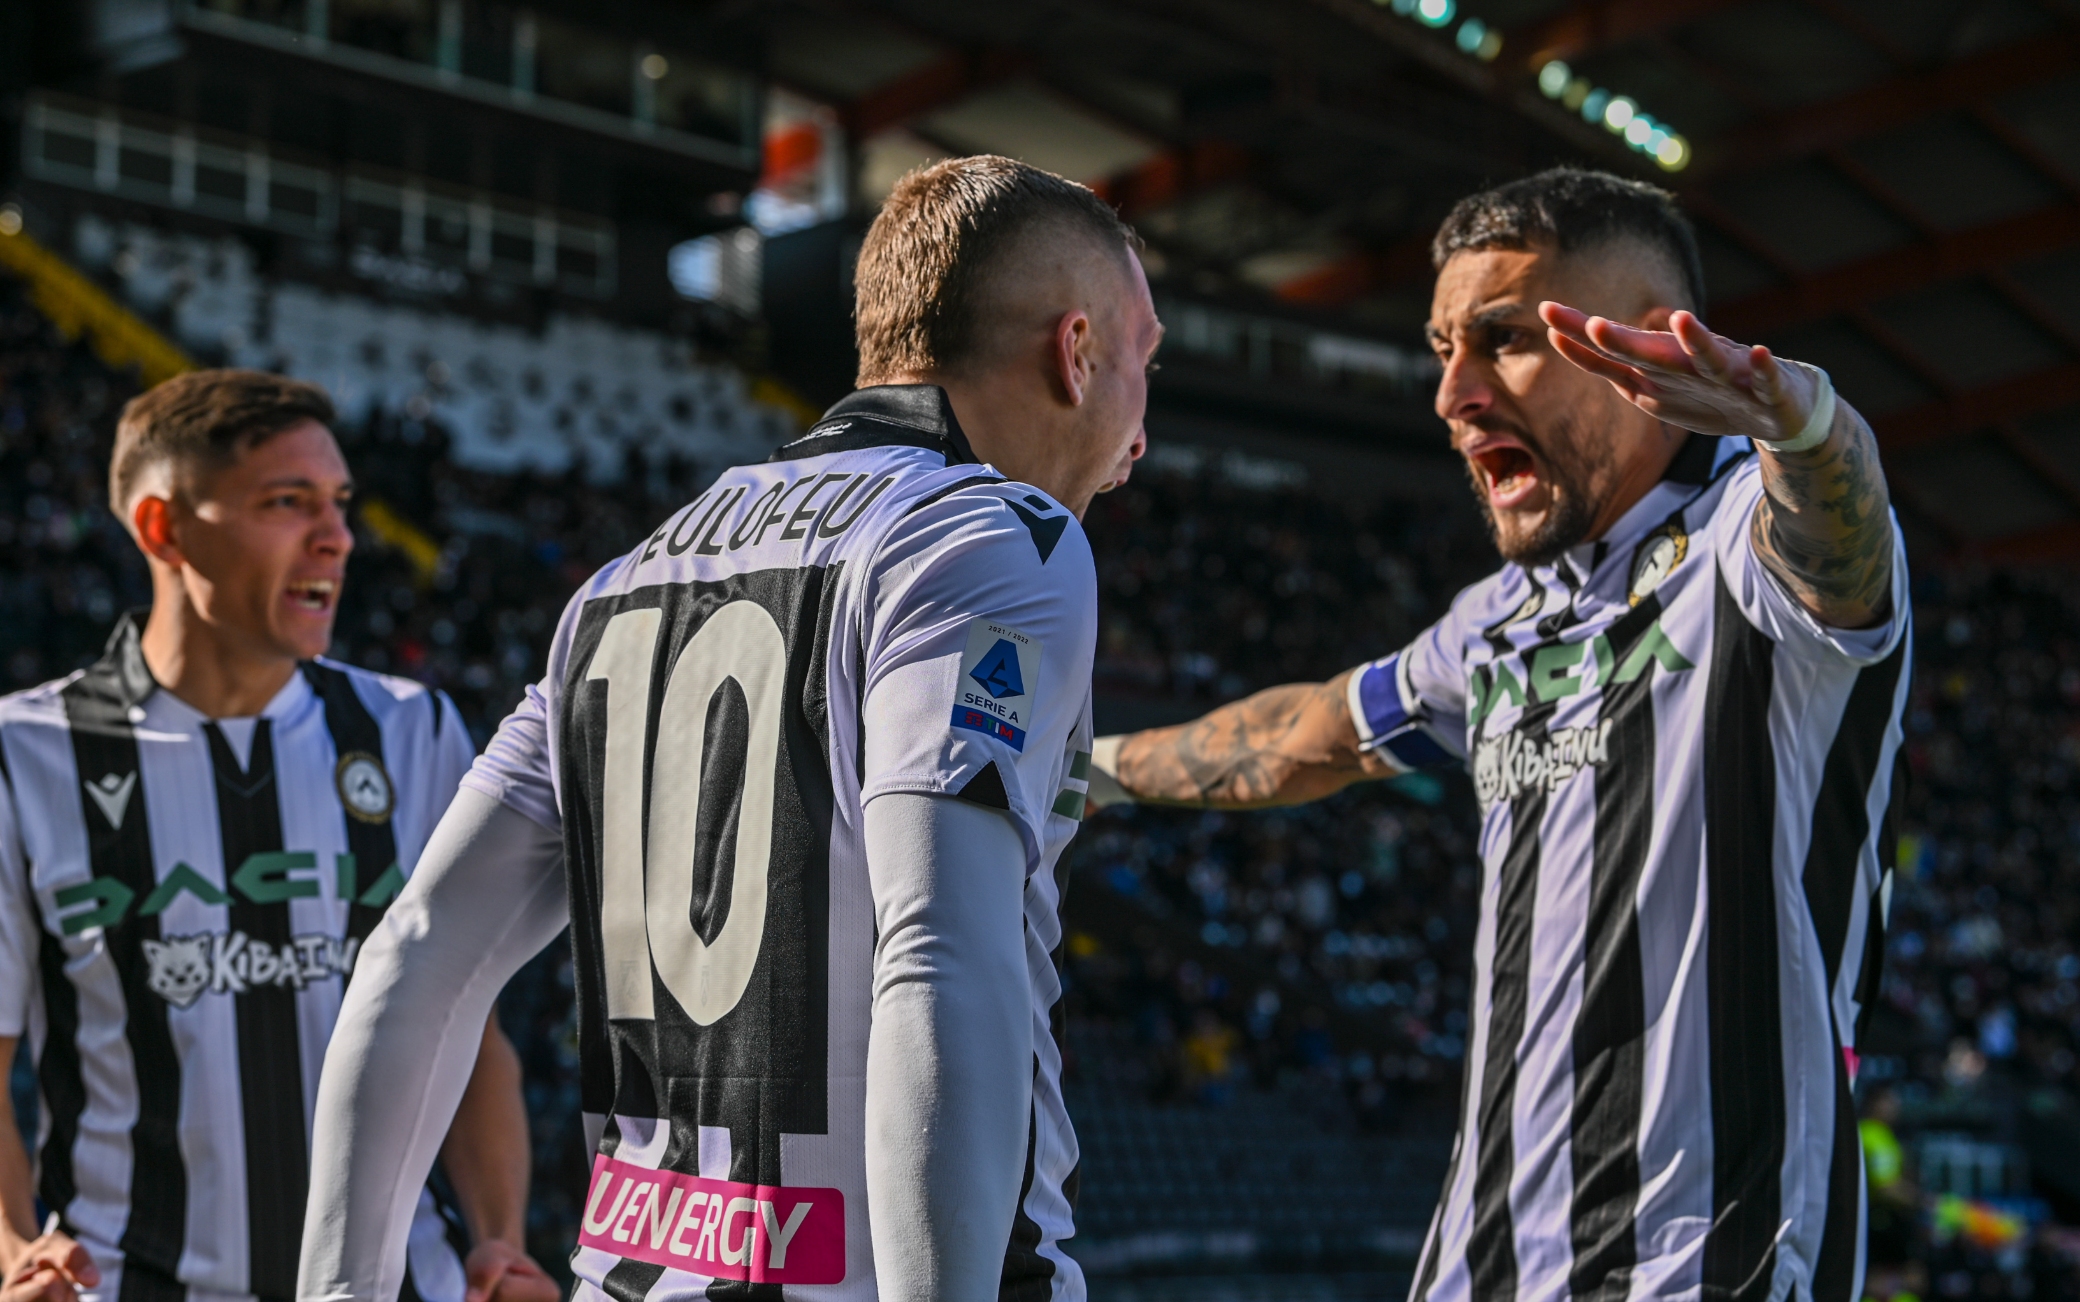 Udinese claimed three vital points in the first match of Serie A Round 28 as they beat Sampdoria with goals from Destiny Udogie and Gerard Deulofeu